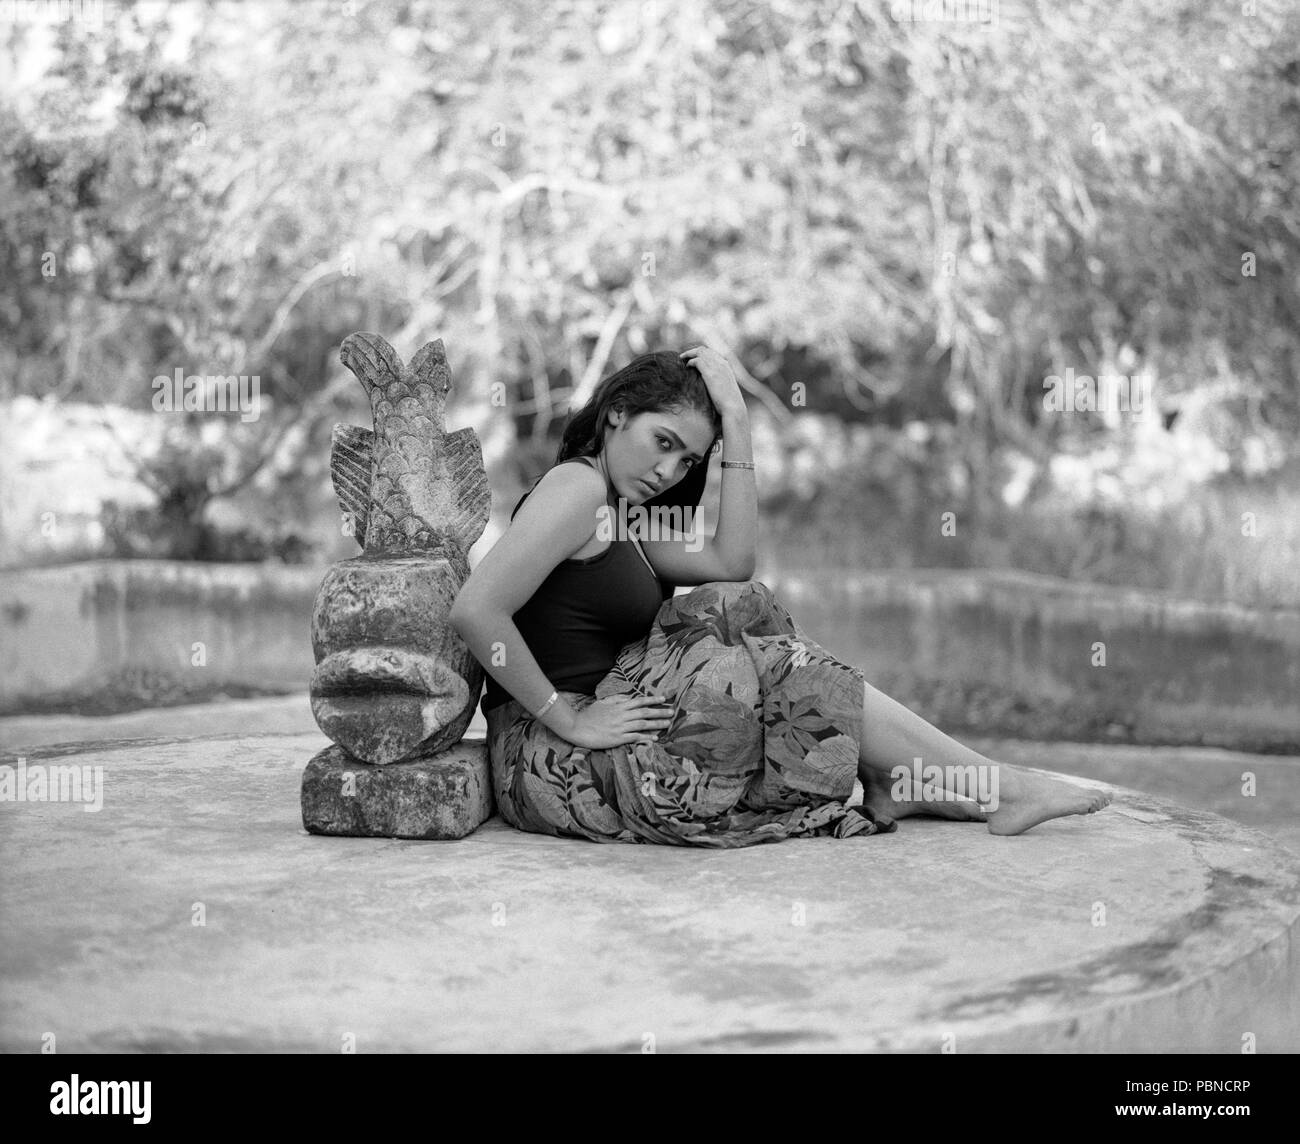 17 years old teenager girl in an outdoor, environmental portrait session. B&W medium format film. Stock Photo